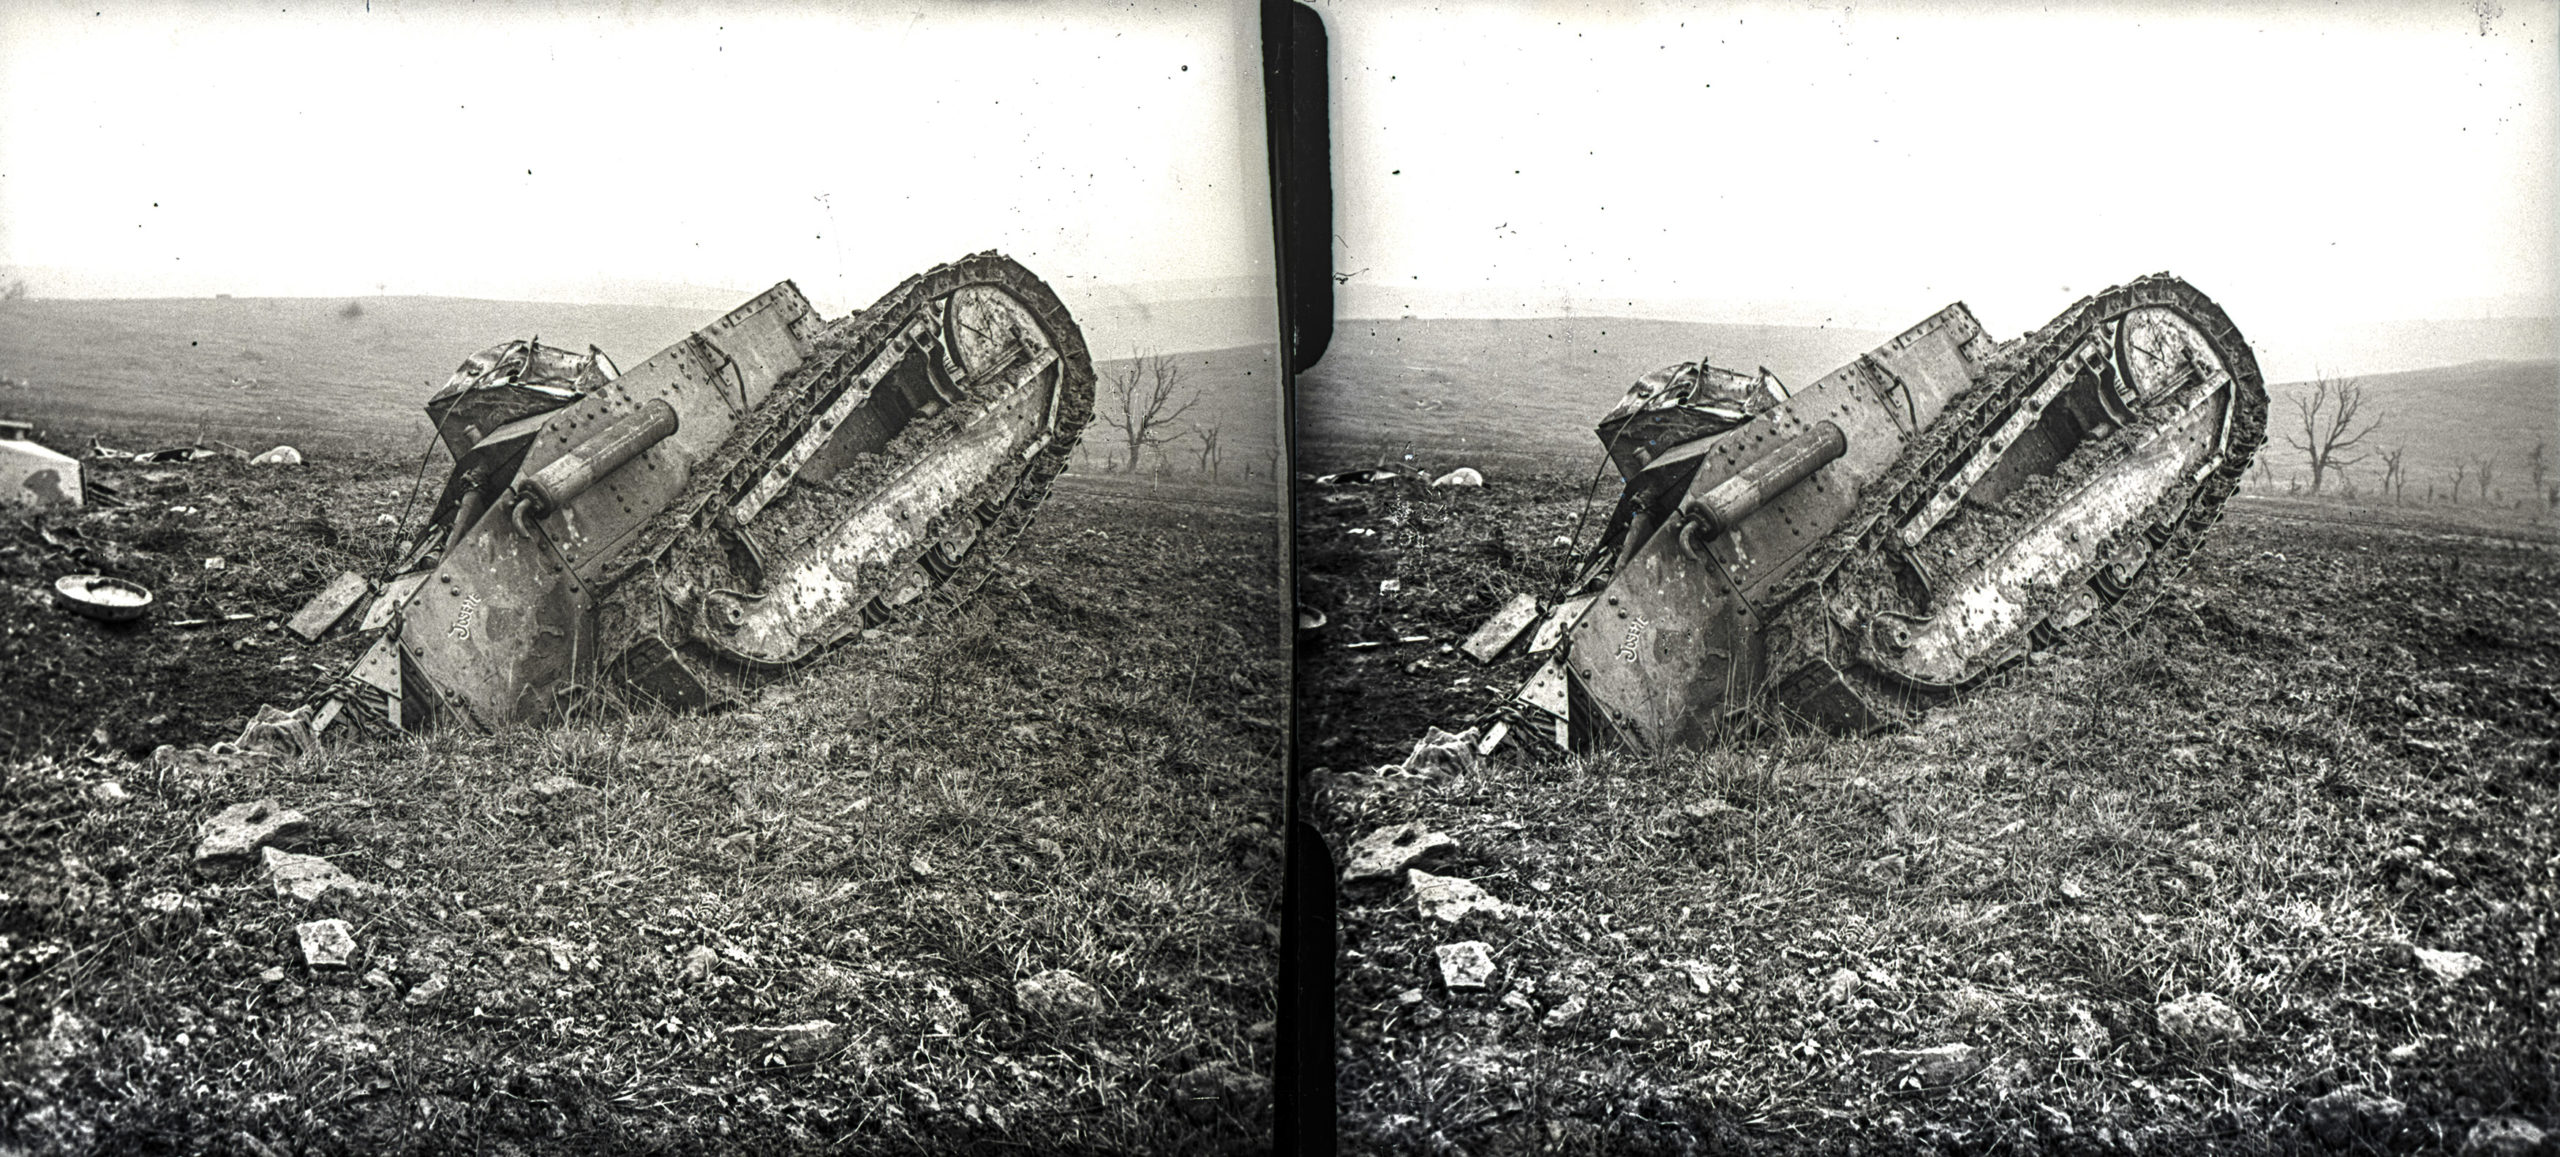 The Honorat Collection - A scuttled tank on the fields of Verdun.